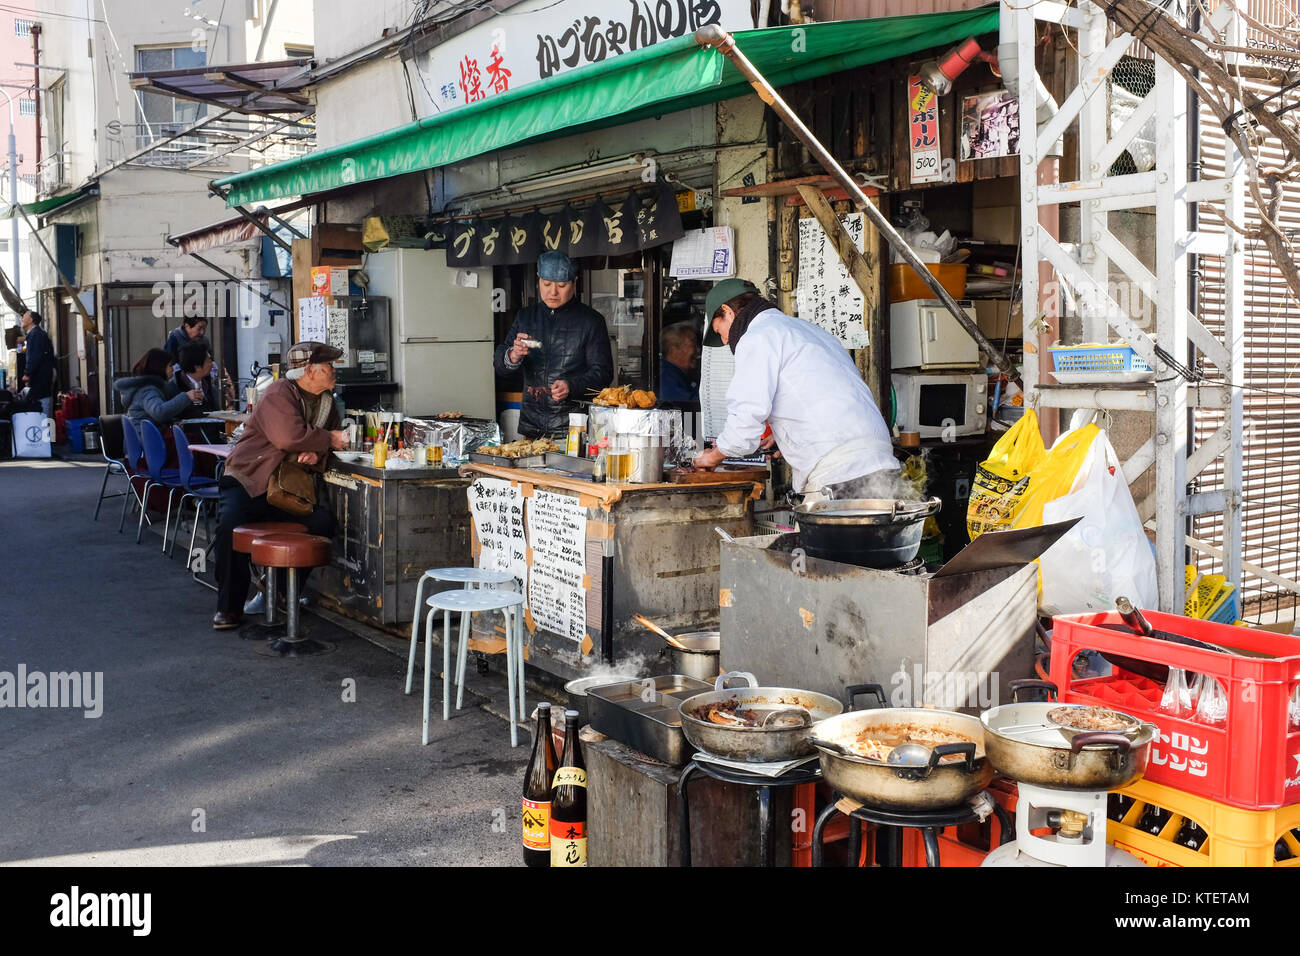 A small restaurant near Asakusa in Tokyo, Japan, where people can also dine on tables outside. Stock Photo